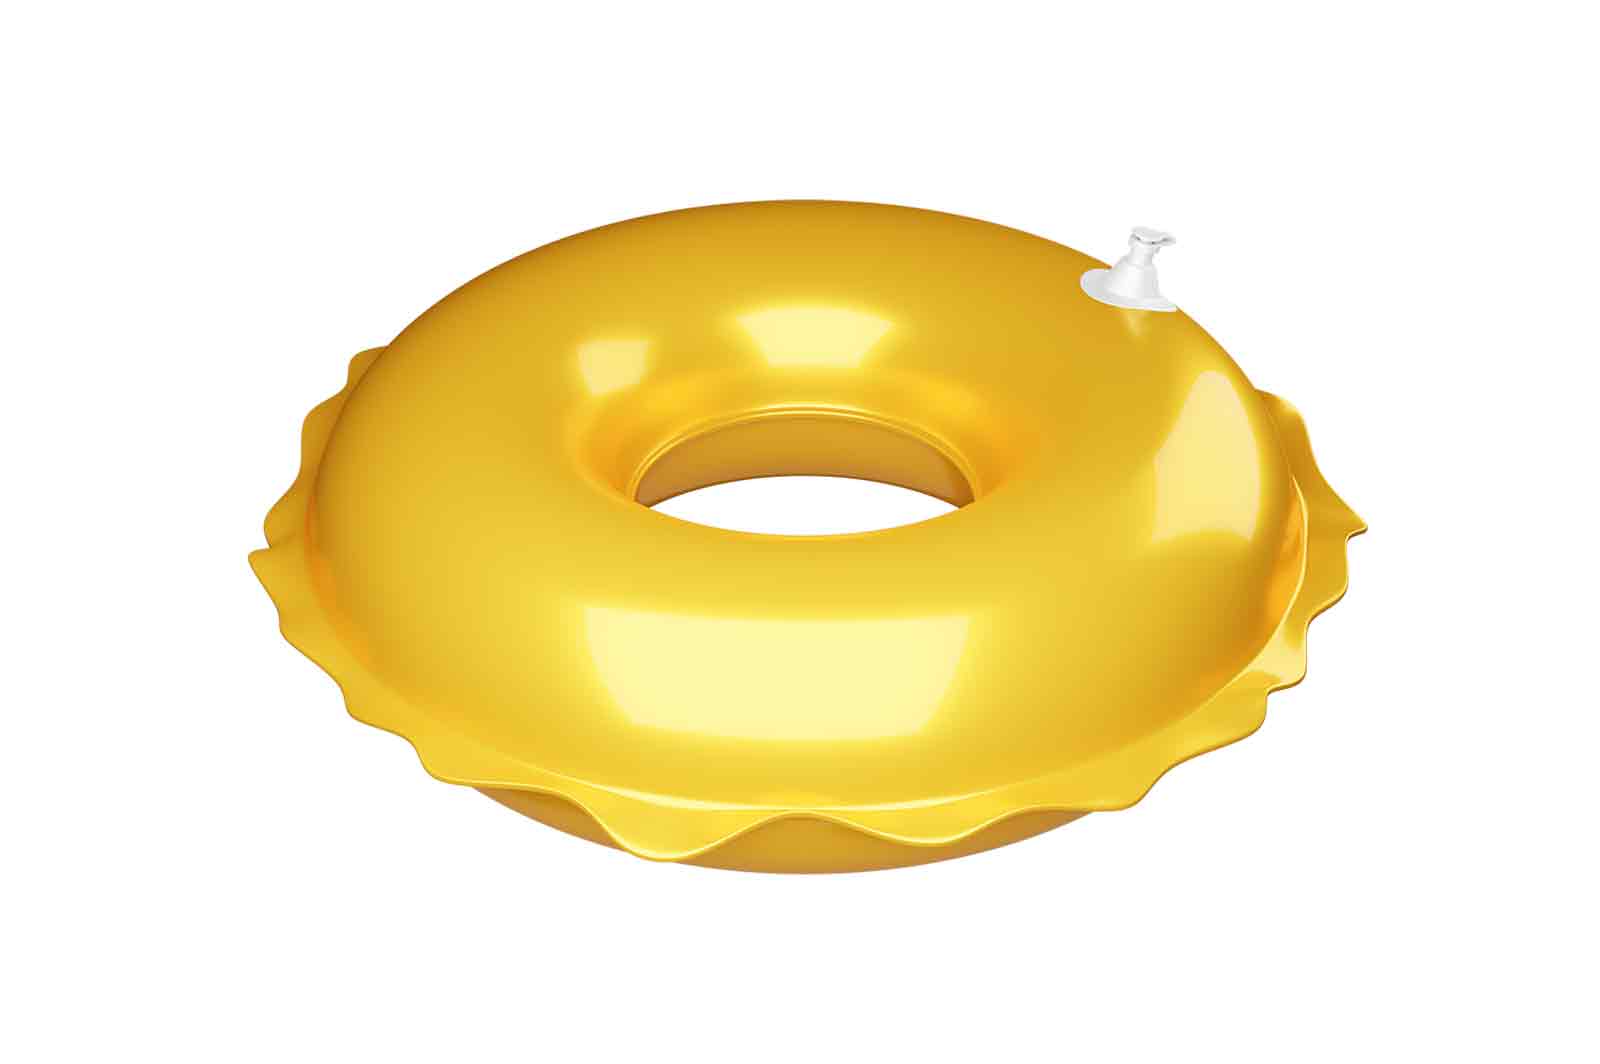 Yellow safety inflatable rubber ring 3d rendered icon illustration. Lifebuoy, swimming buoy and summer beach toy for children